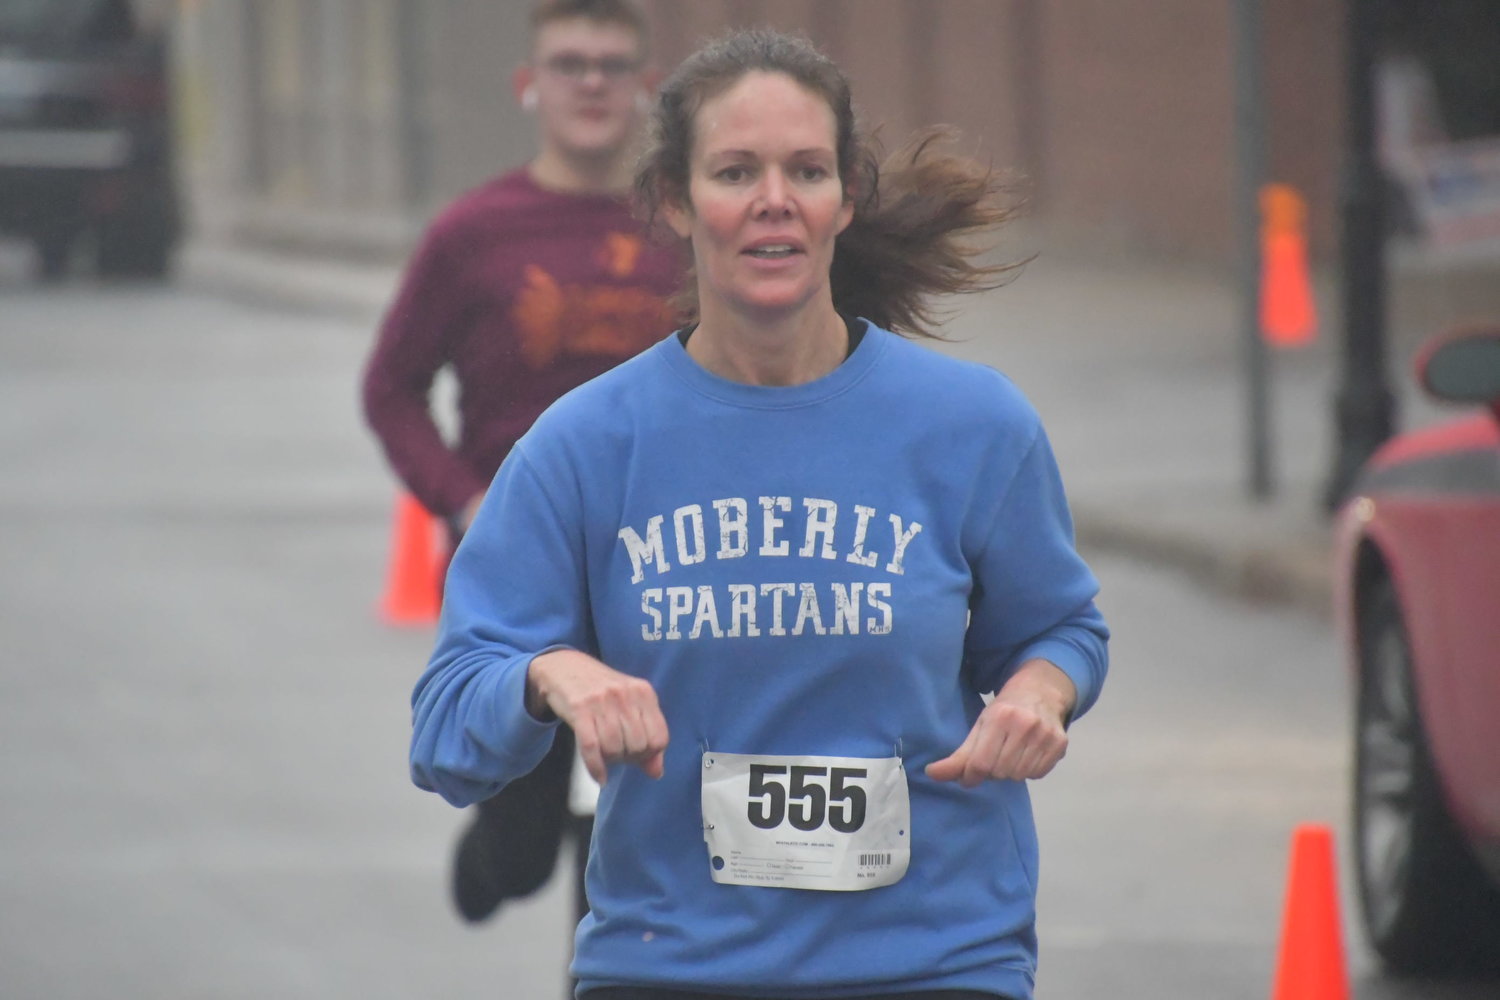 Jessica Morris was one of the top finishers in the 40-49 female age group at the Turkey Trot.